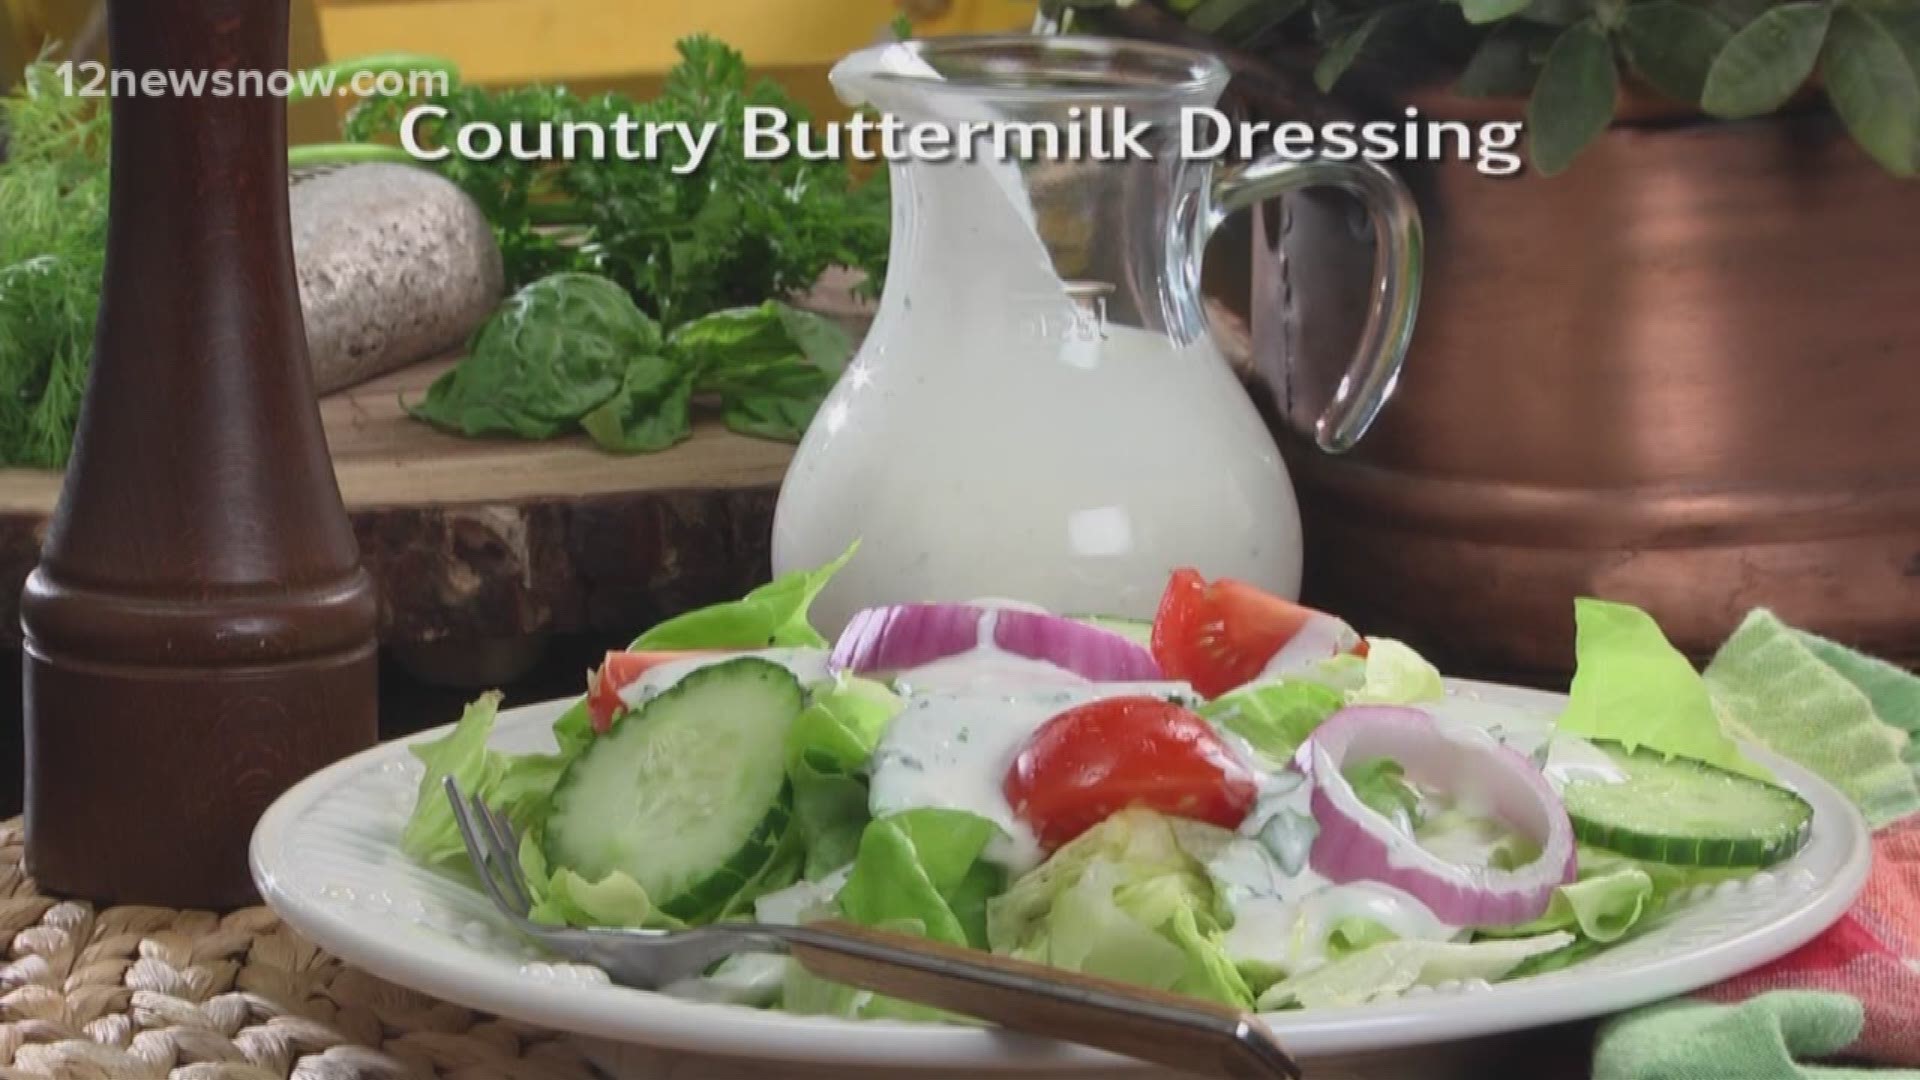 Mr. Food creates a quick and easy 'country buttermilk salad dressing' for Earth Day